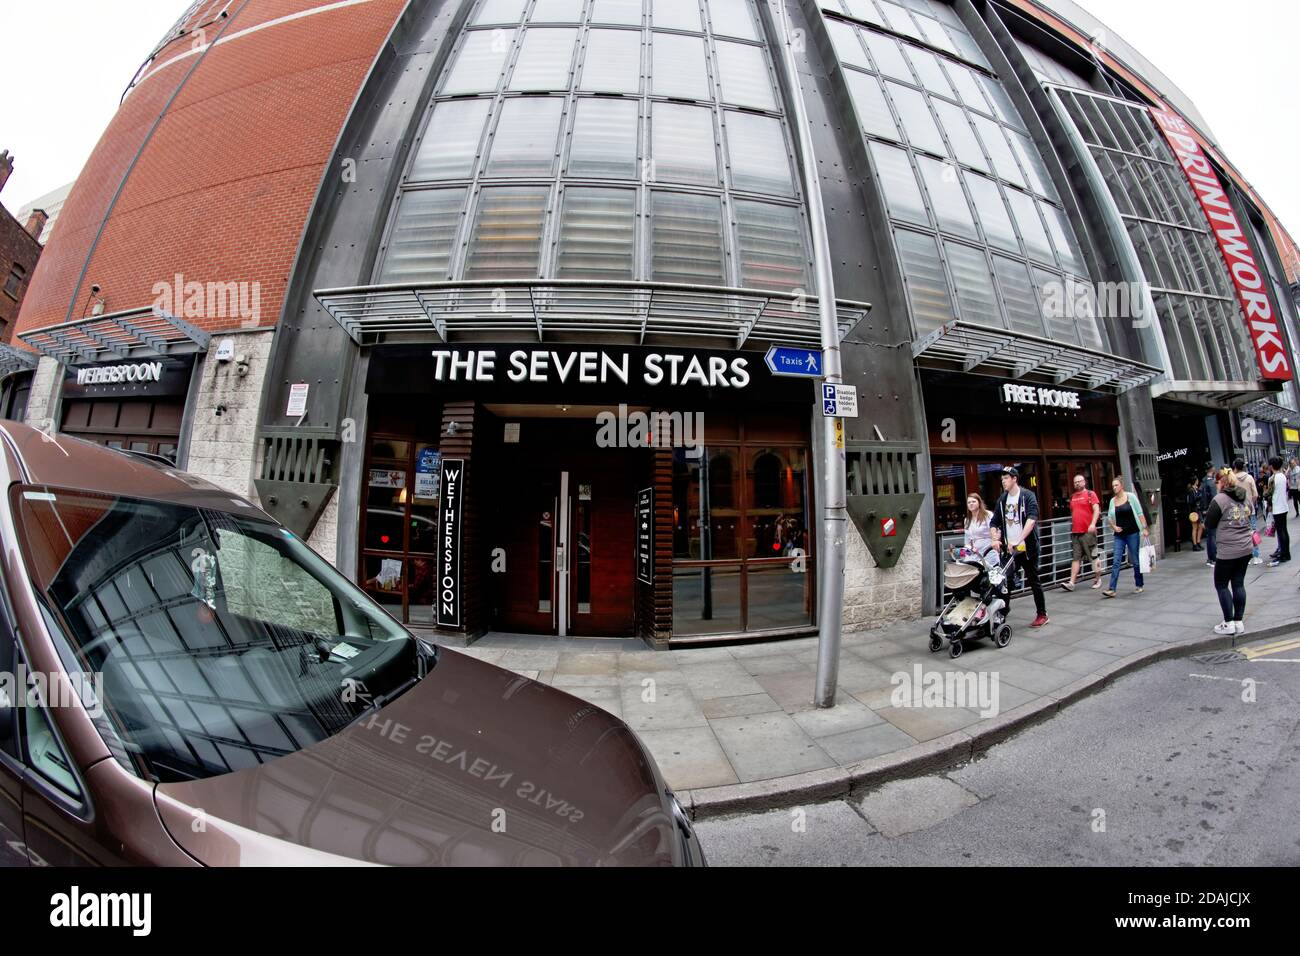 The Seven Stars pub in Printworks: multi-purpose entertainment hub in central Manchester, from Dantzic Street. Formerly a newspaper printing facility. Stock Photo